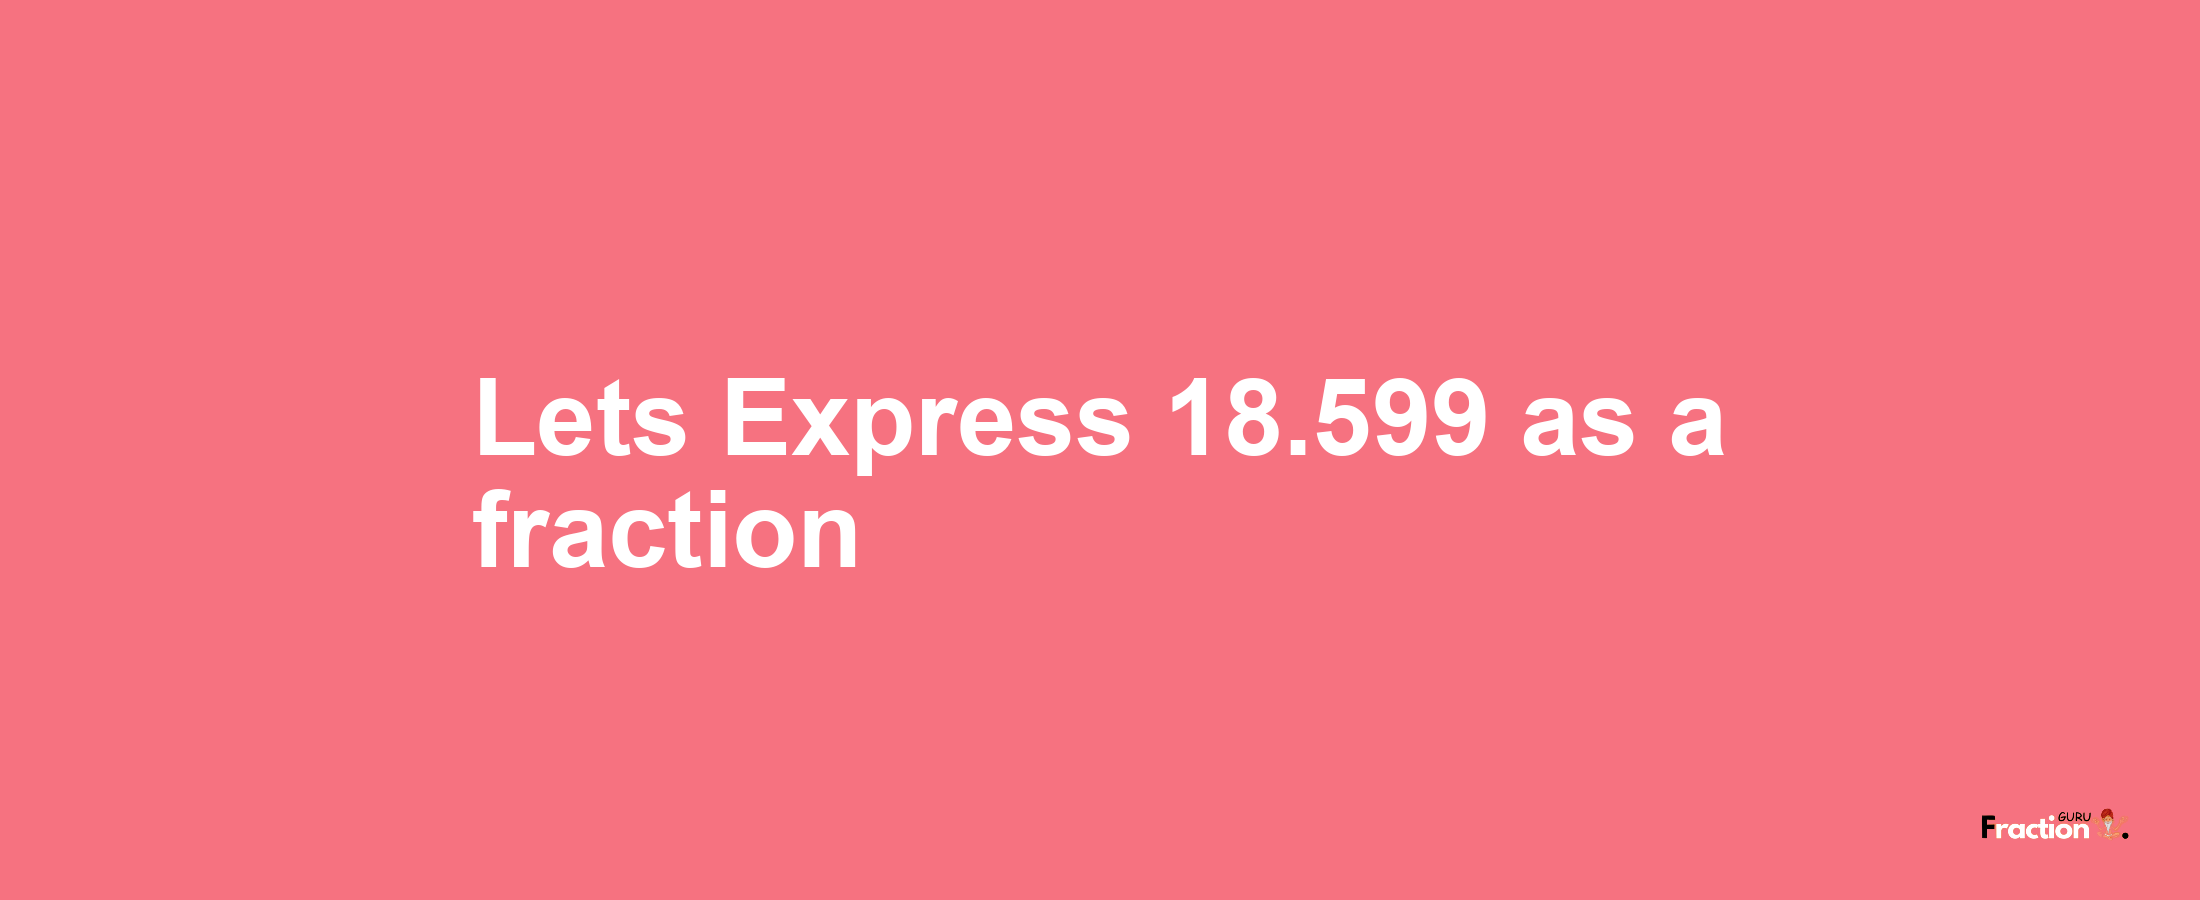 Lets Express 18.599 as afraction